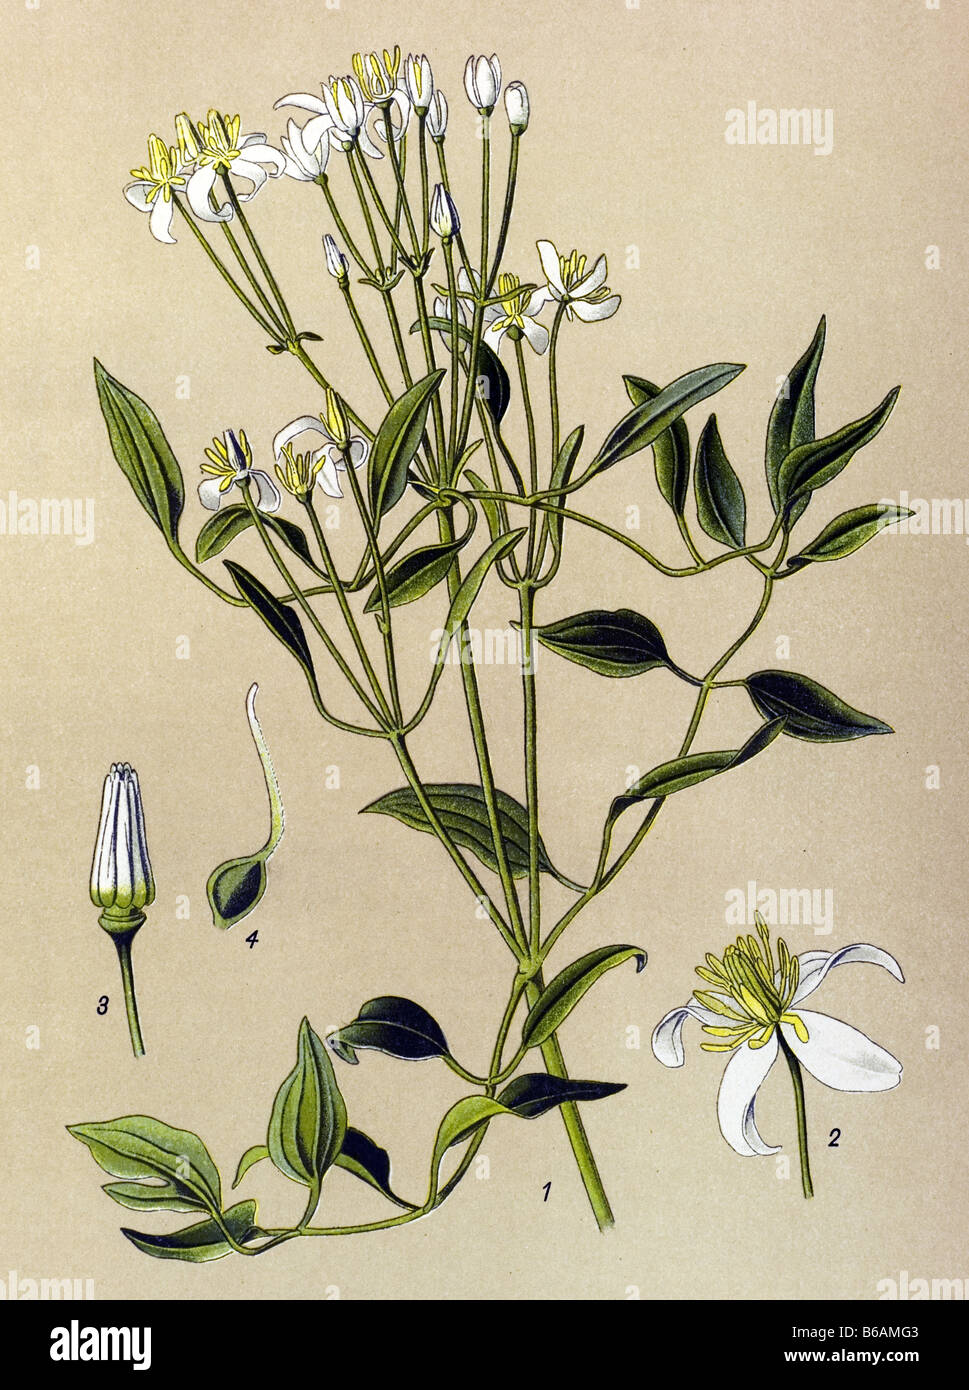 Ground virginsbower, Clematis recta, poisonous plants illustrations Stock Photo